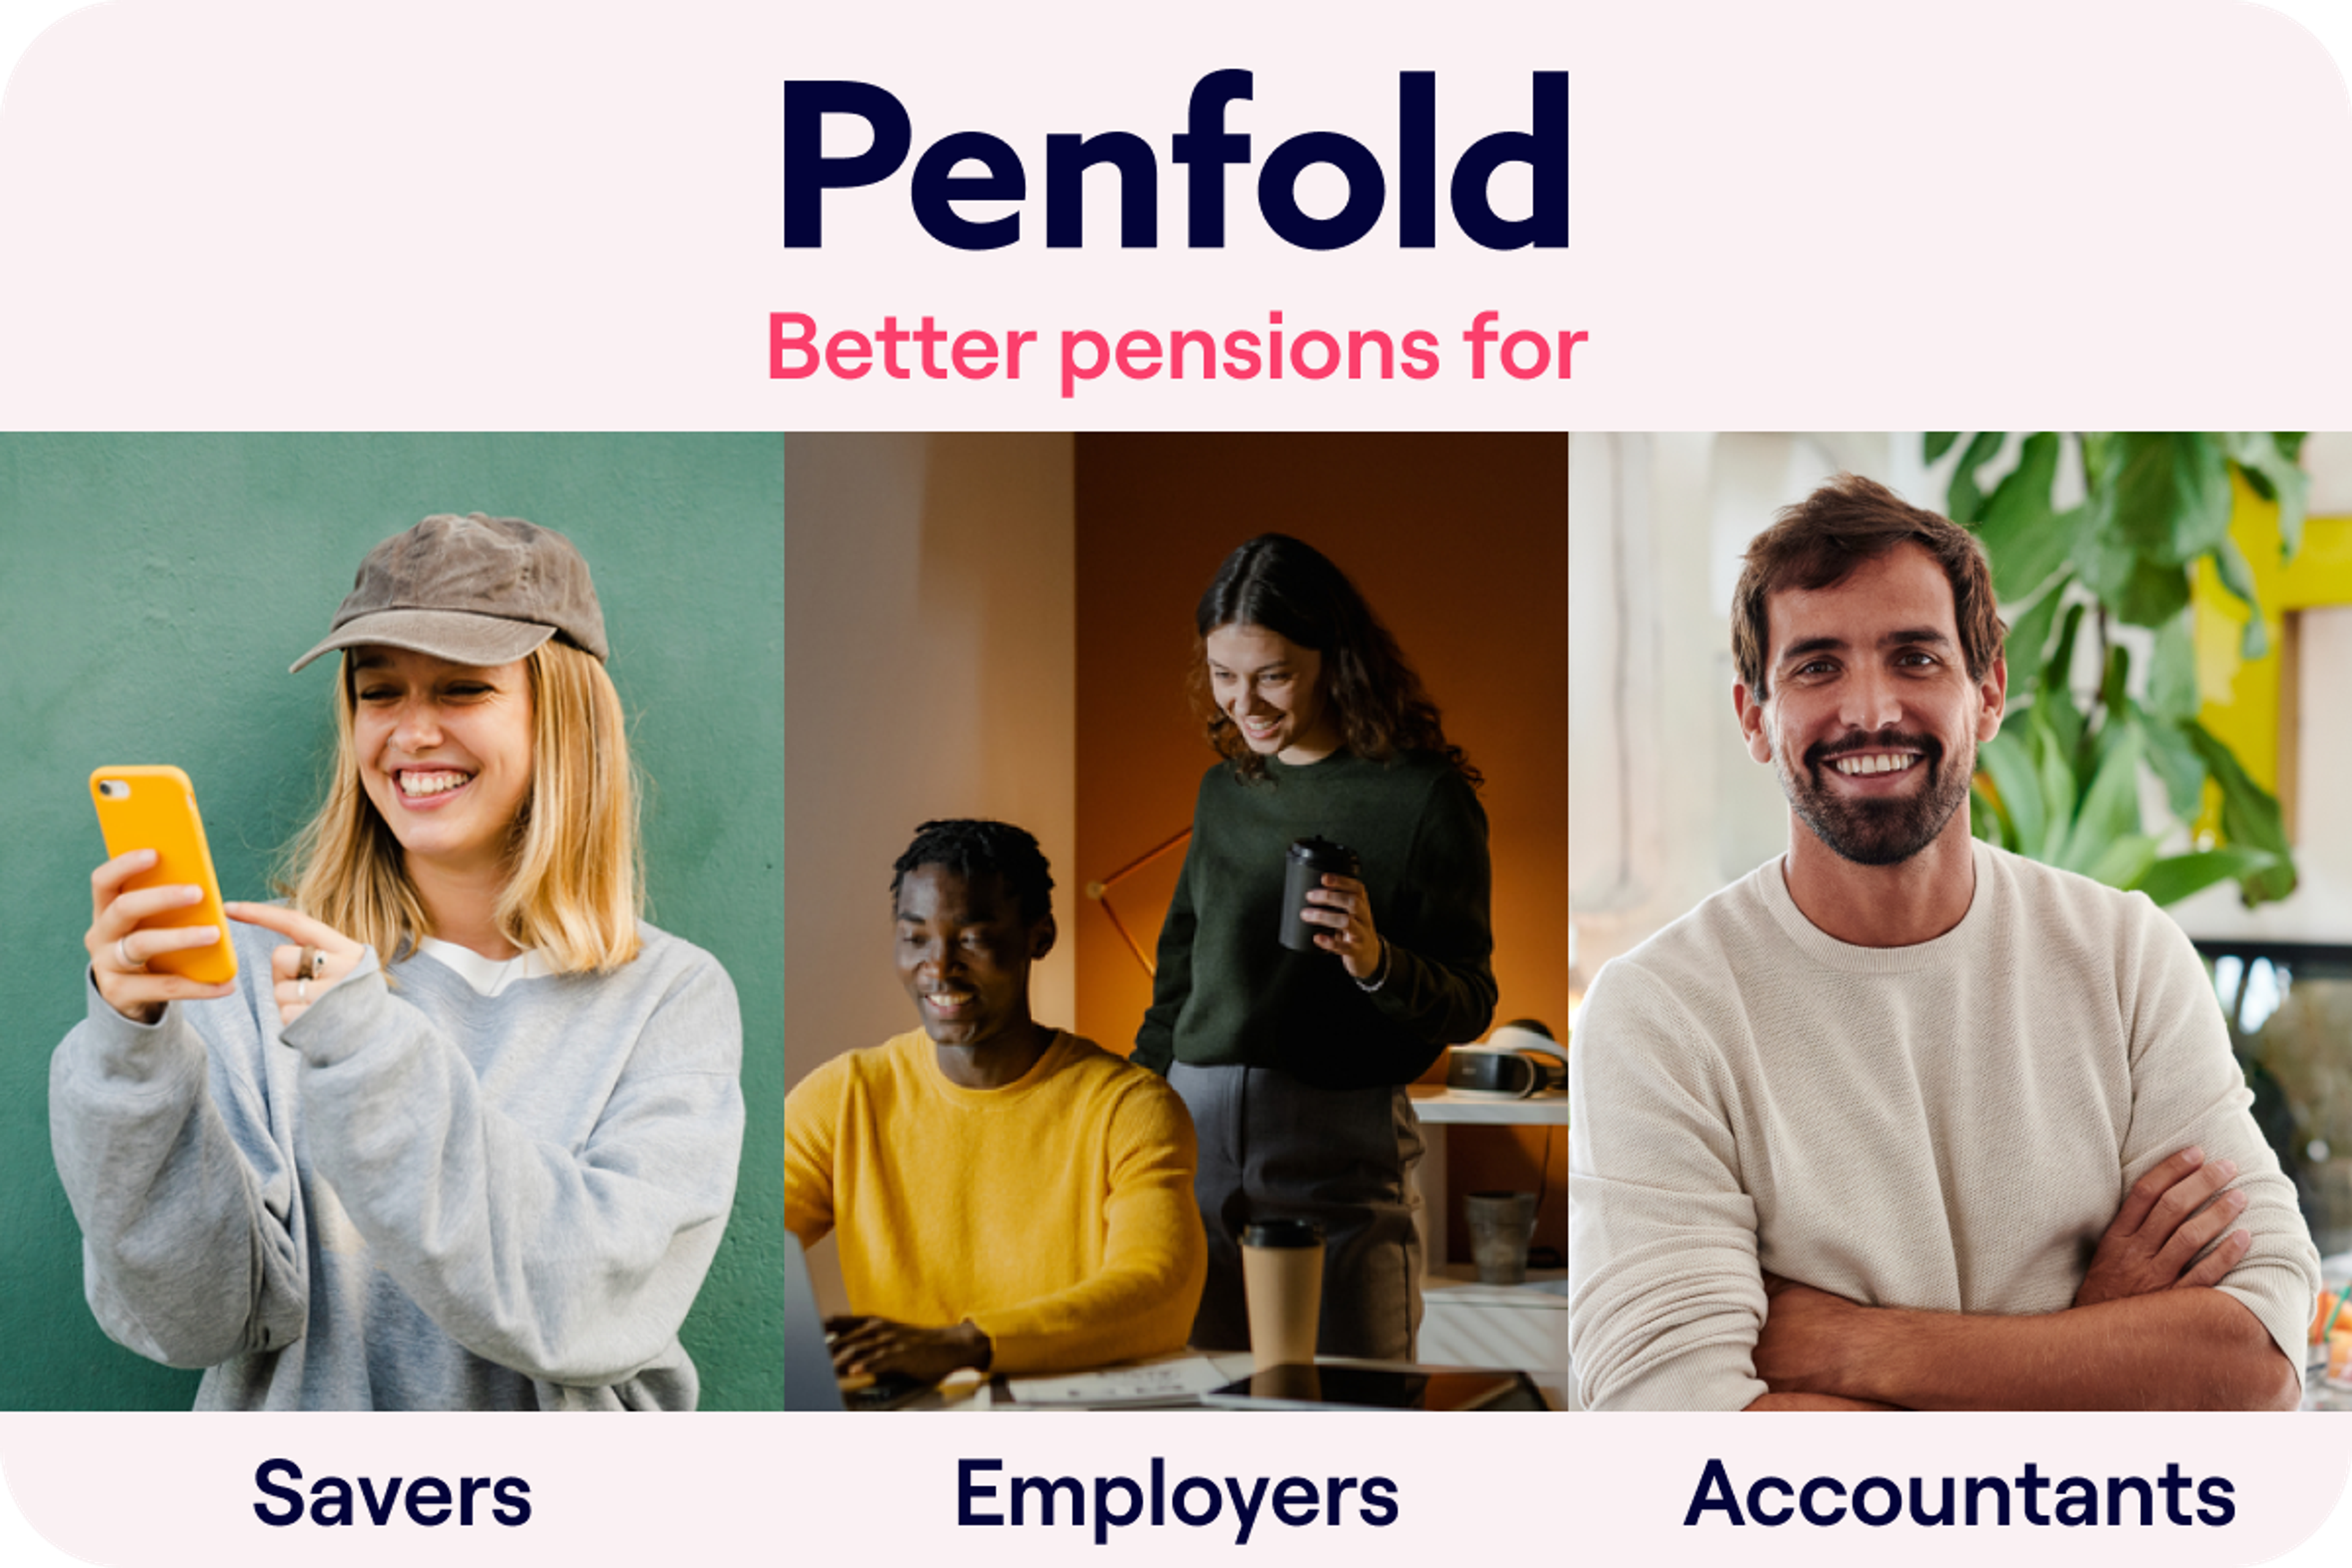 Graphic for Penfold featuring the tagline "Better pensions for." Below are three side-by-side images: on the left, a young woman in a gray sweatshirt and cap smiles at her phone; in the center, a woman stands holding a mug beside a seated man at a laptop; on the right, a man in a cream sweater smiles with crossed arms. Below each image, text reads "Savers," "Employers," and "Accountants" respectively.